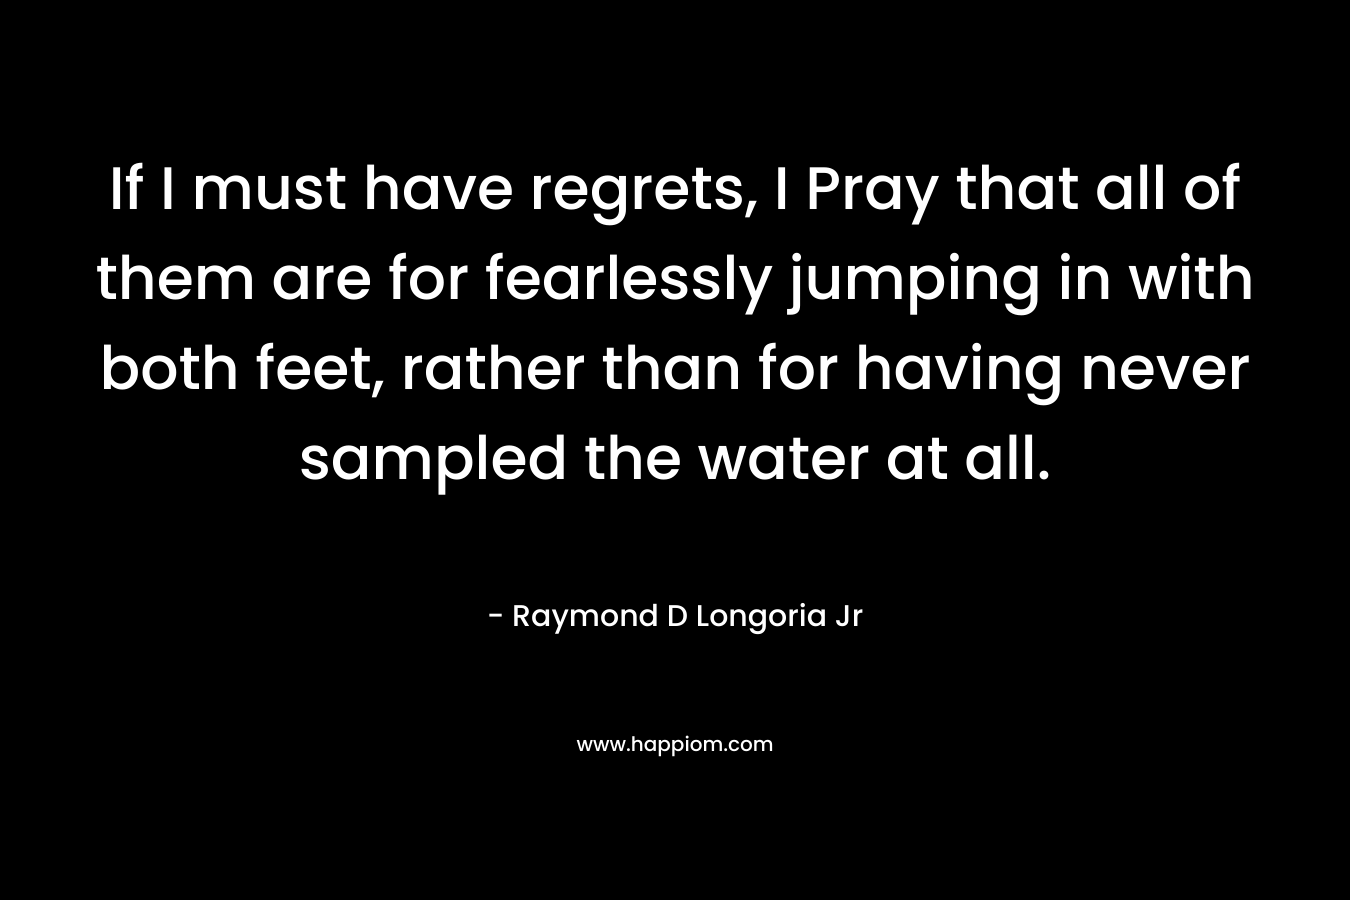 If I must have regrets, I Pray that all of them are for fearlessly jumping in with both feet, rather than for having never sampled the water at all.